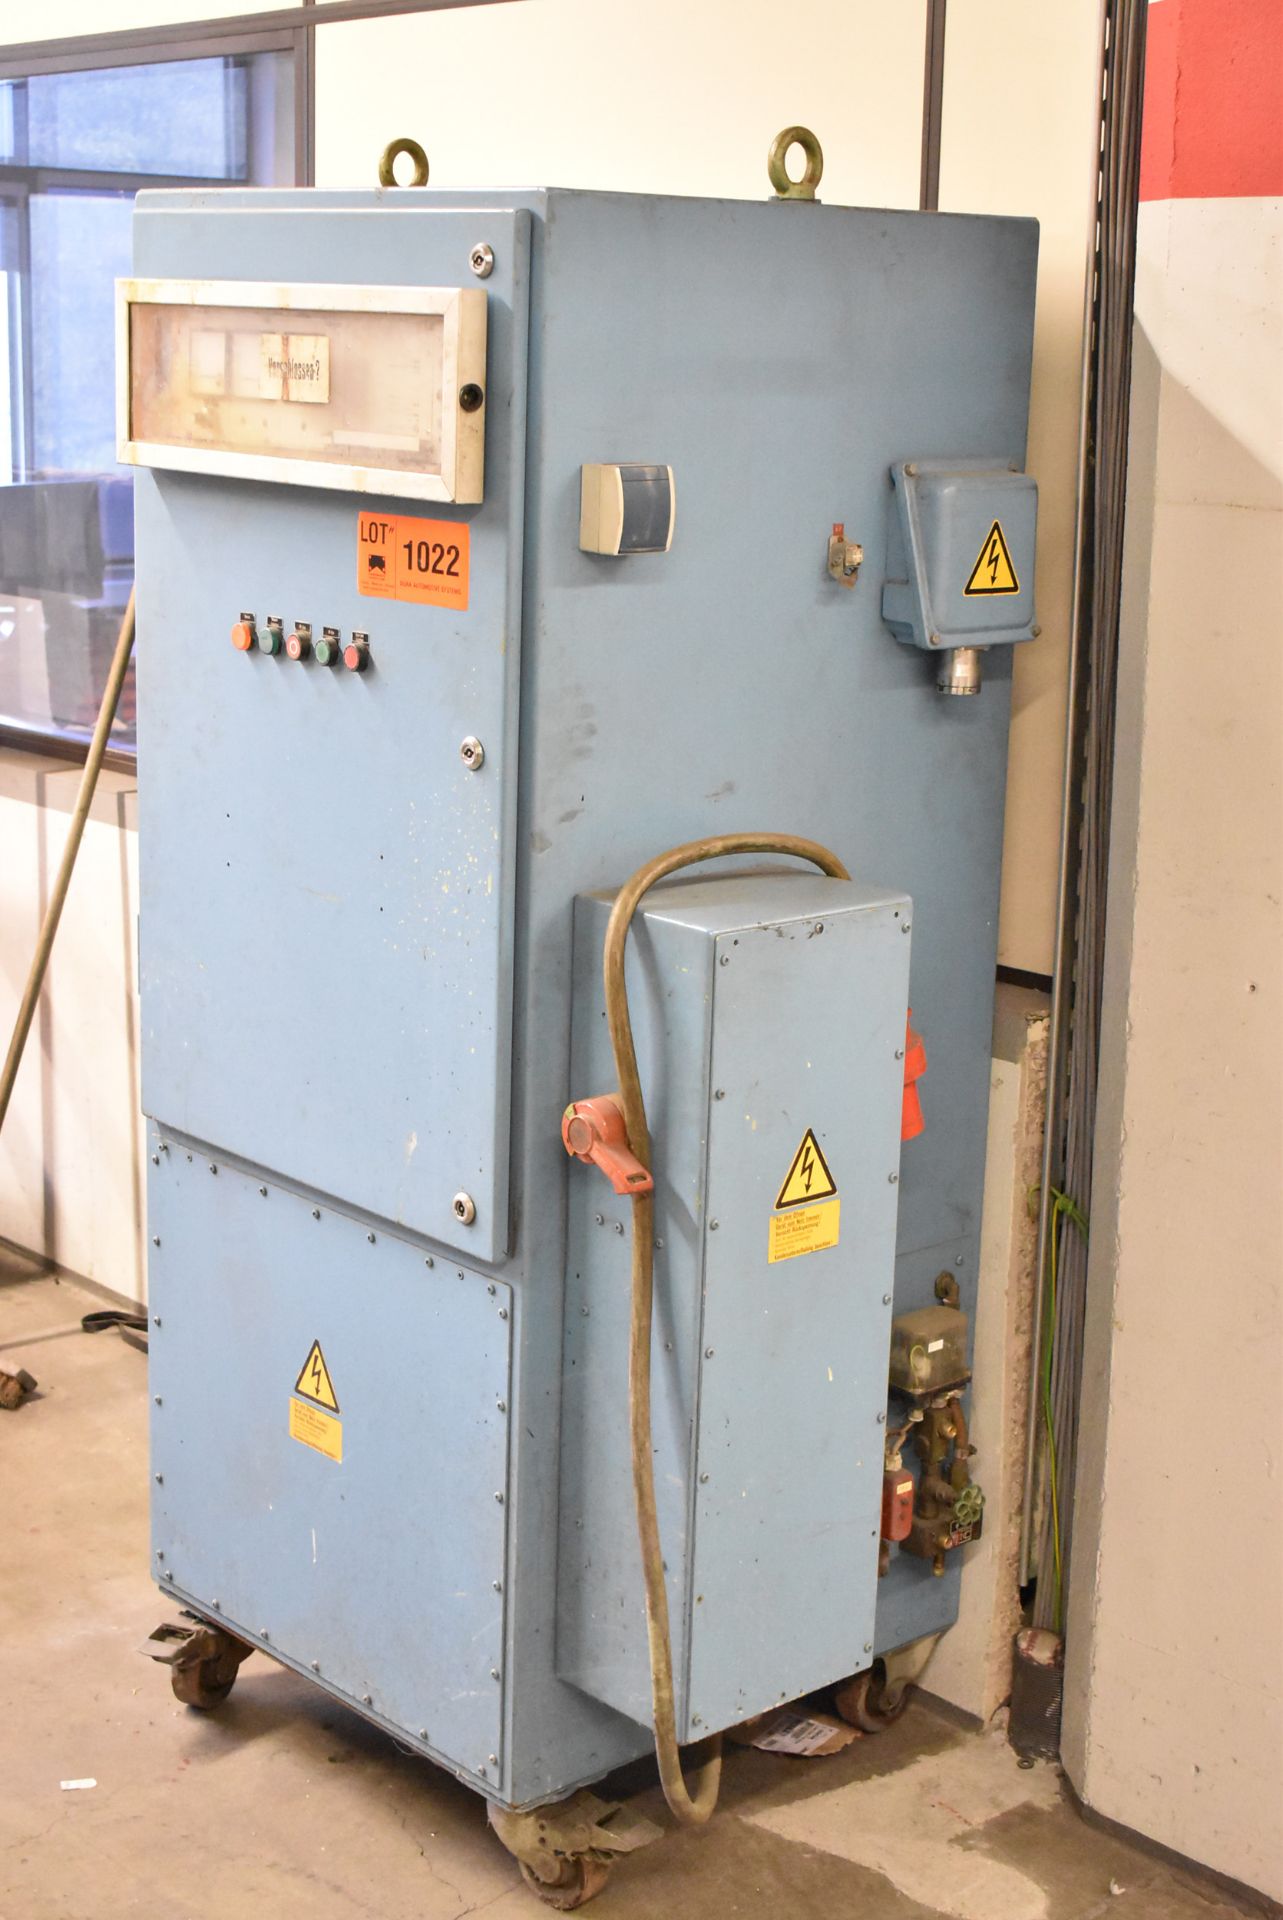 PORTABLE ELECTRICAL CONTROL CABINET (SEL) [RIGGING FEE FOR LOT #1022 - € 27.5 PLUS TAXES]